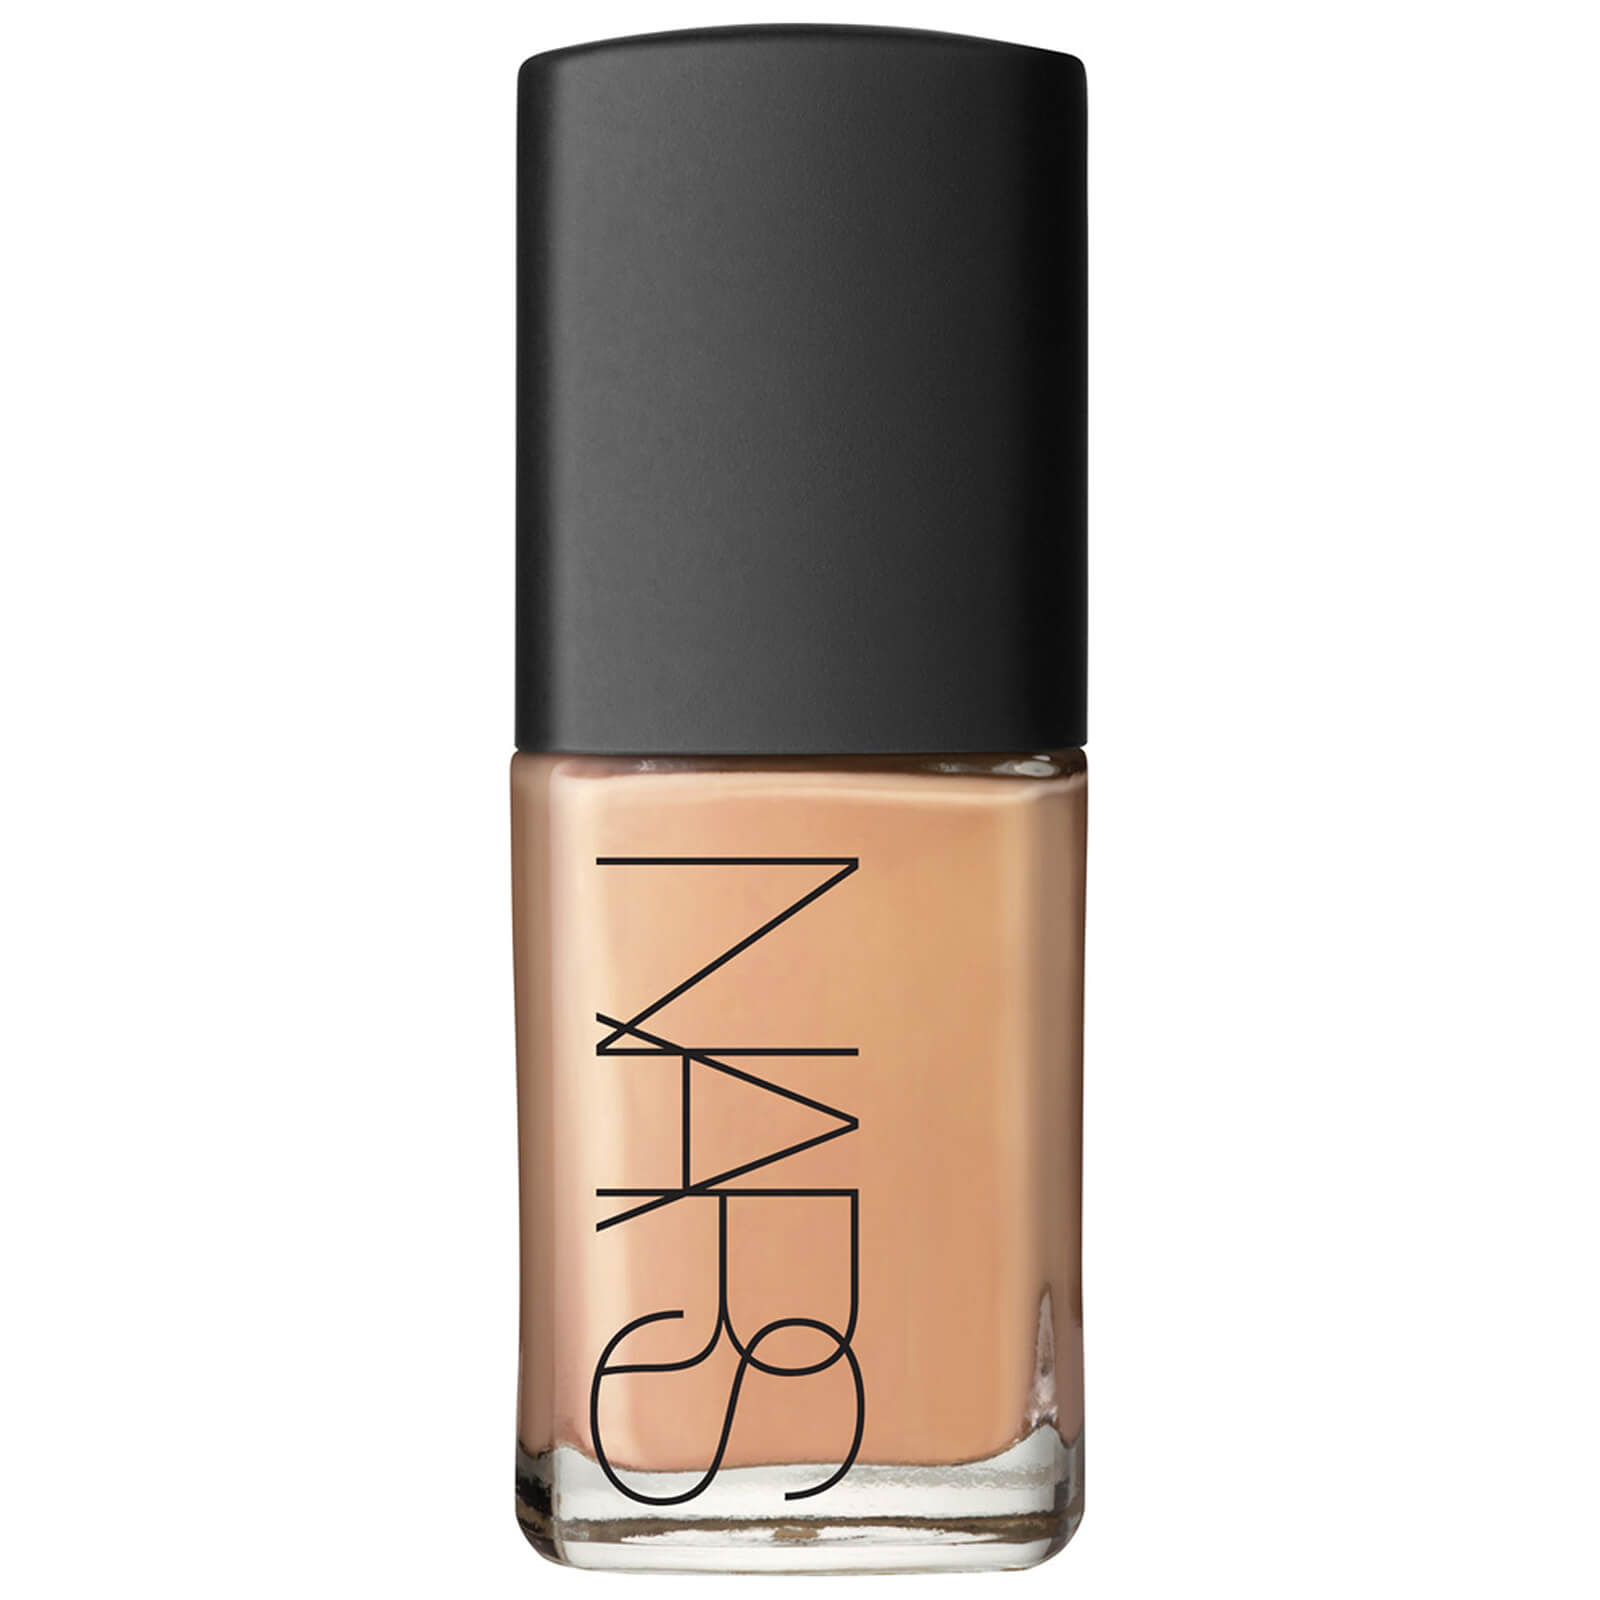 Nars Cosmetics Sheer Glow Foundation (various Shades) - Barcelona In White